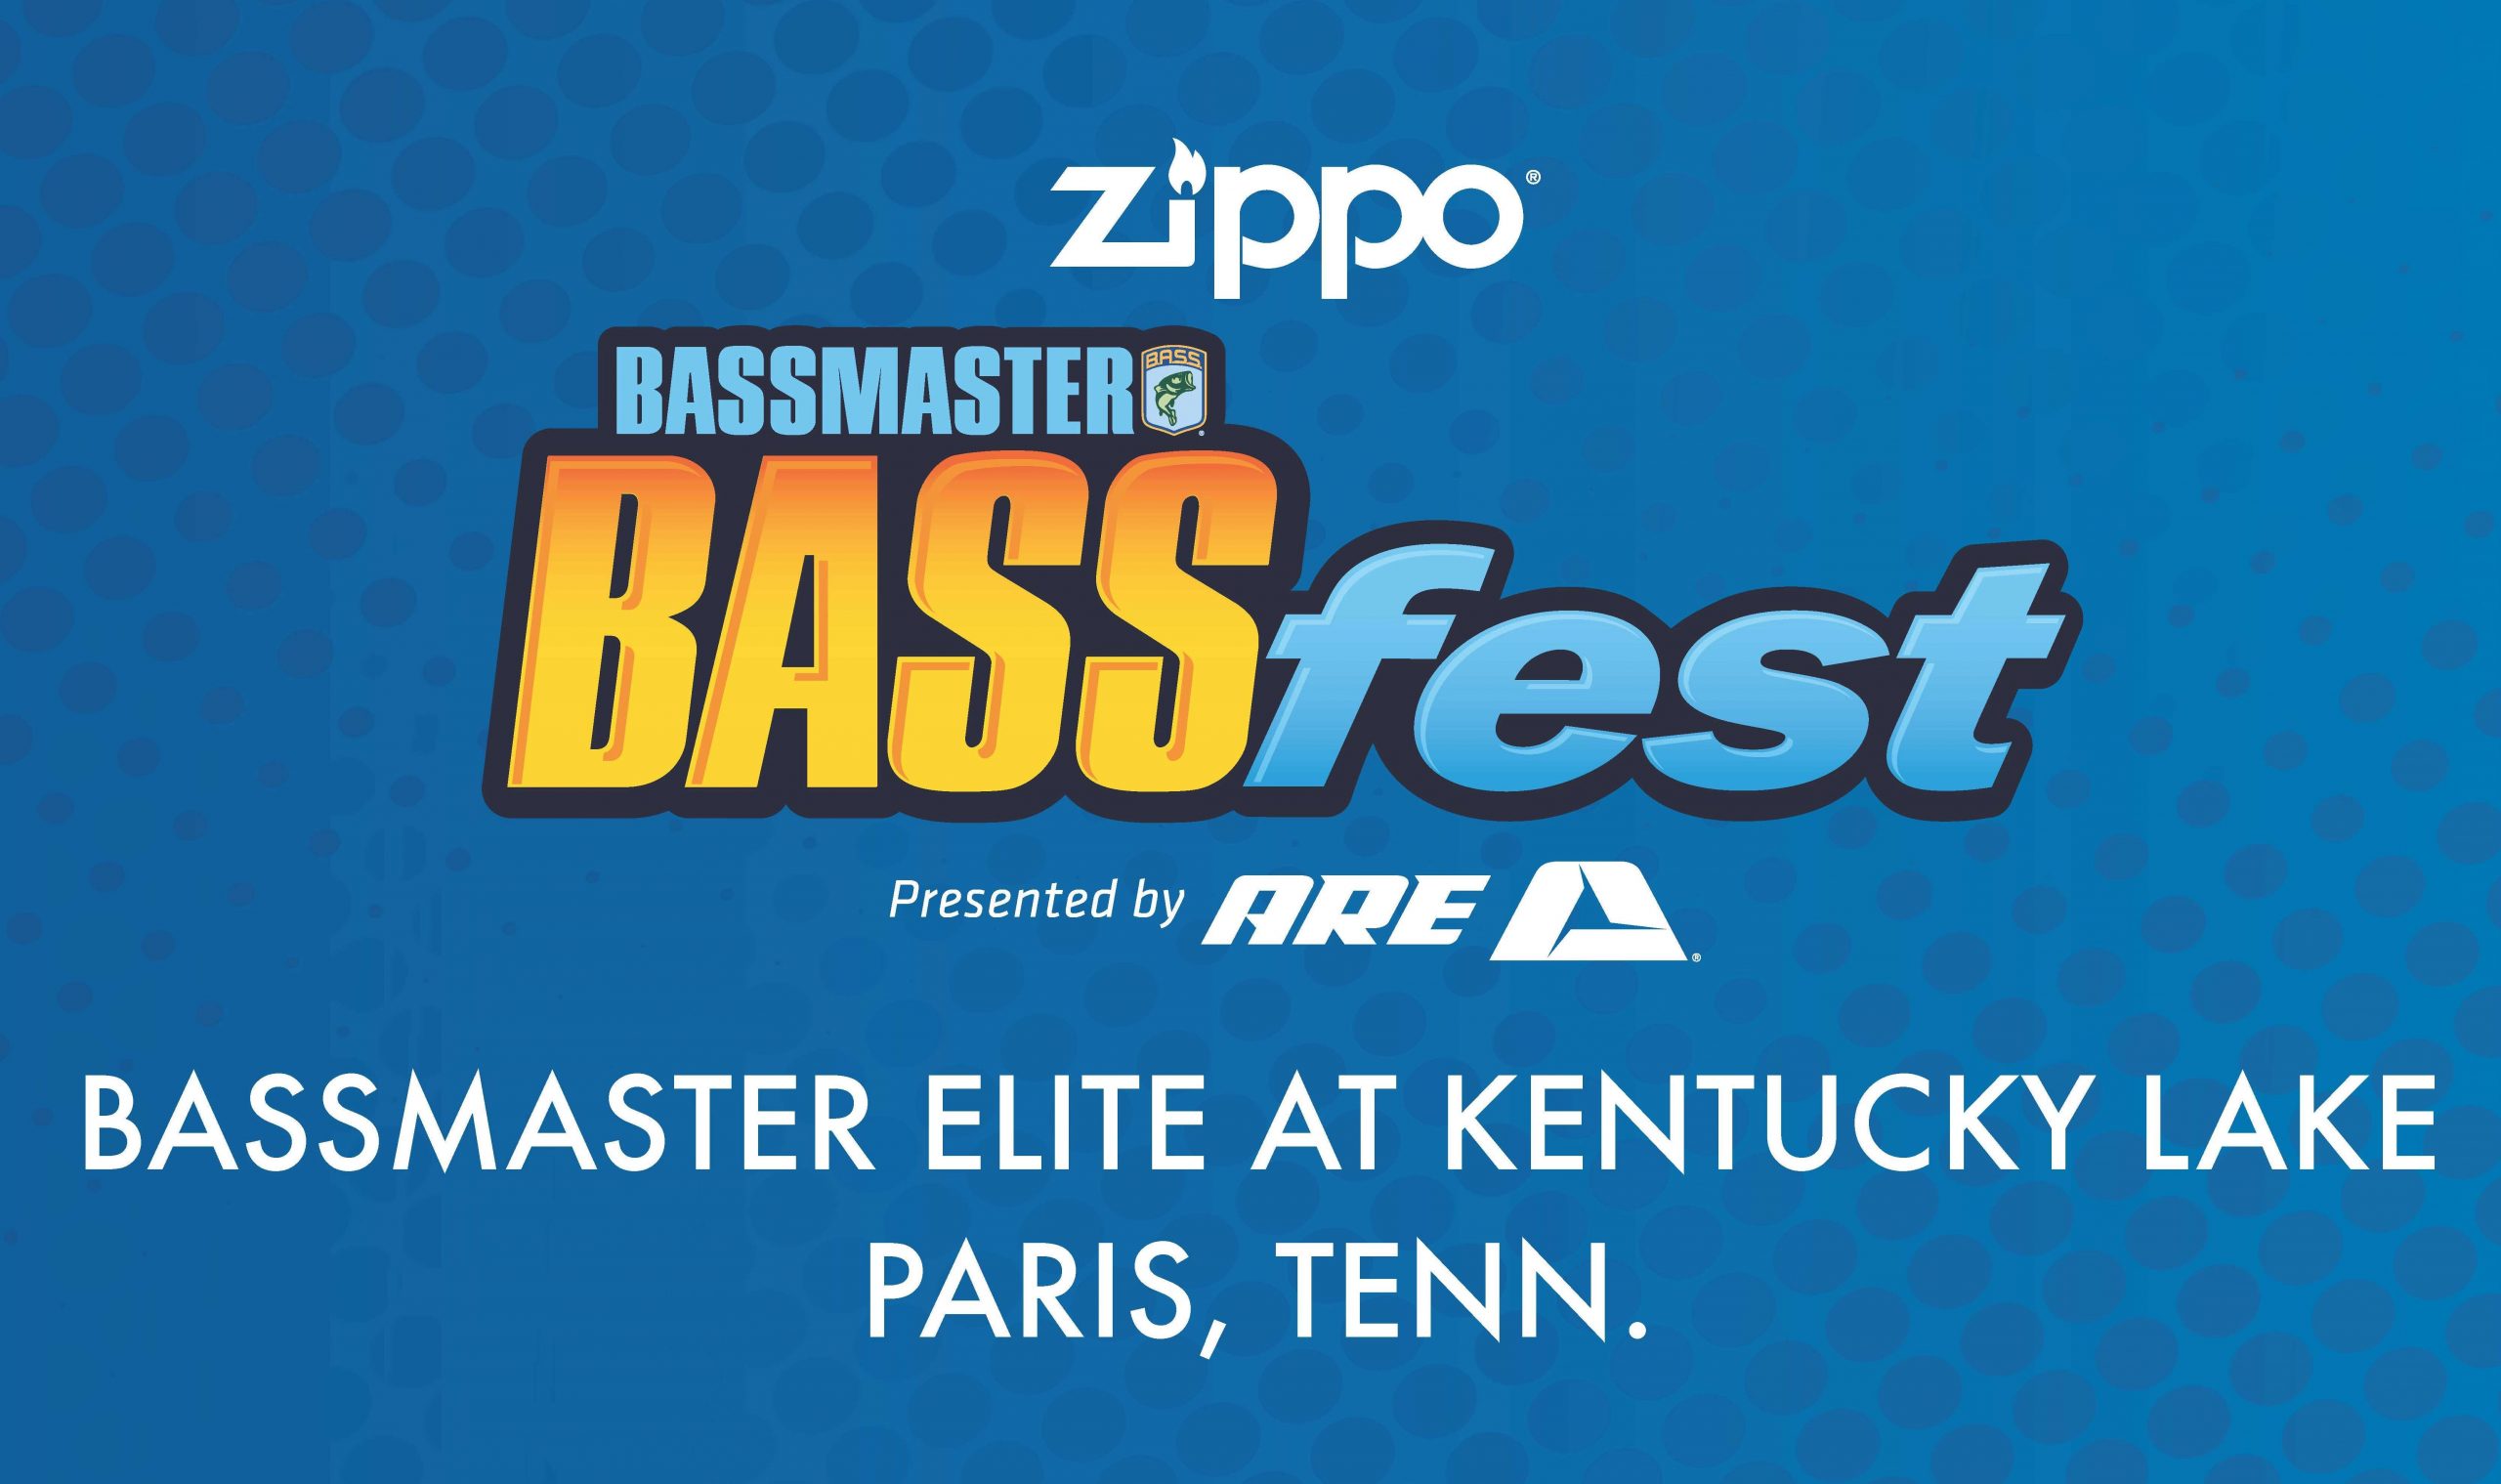 BASSfest would be one of those events where Martens wouldn't show up on the radar much. 